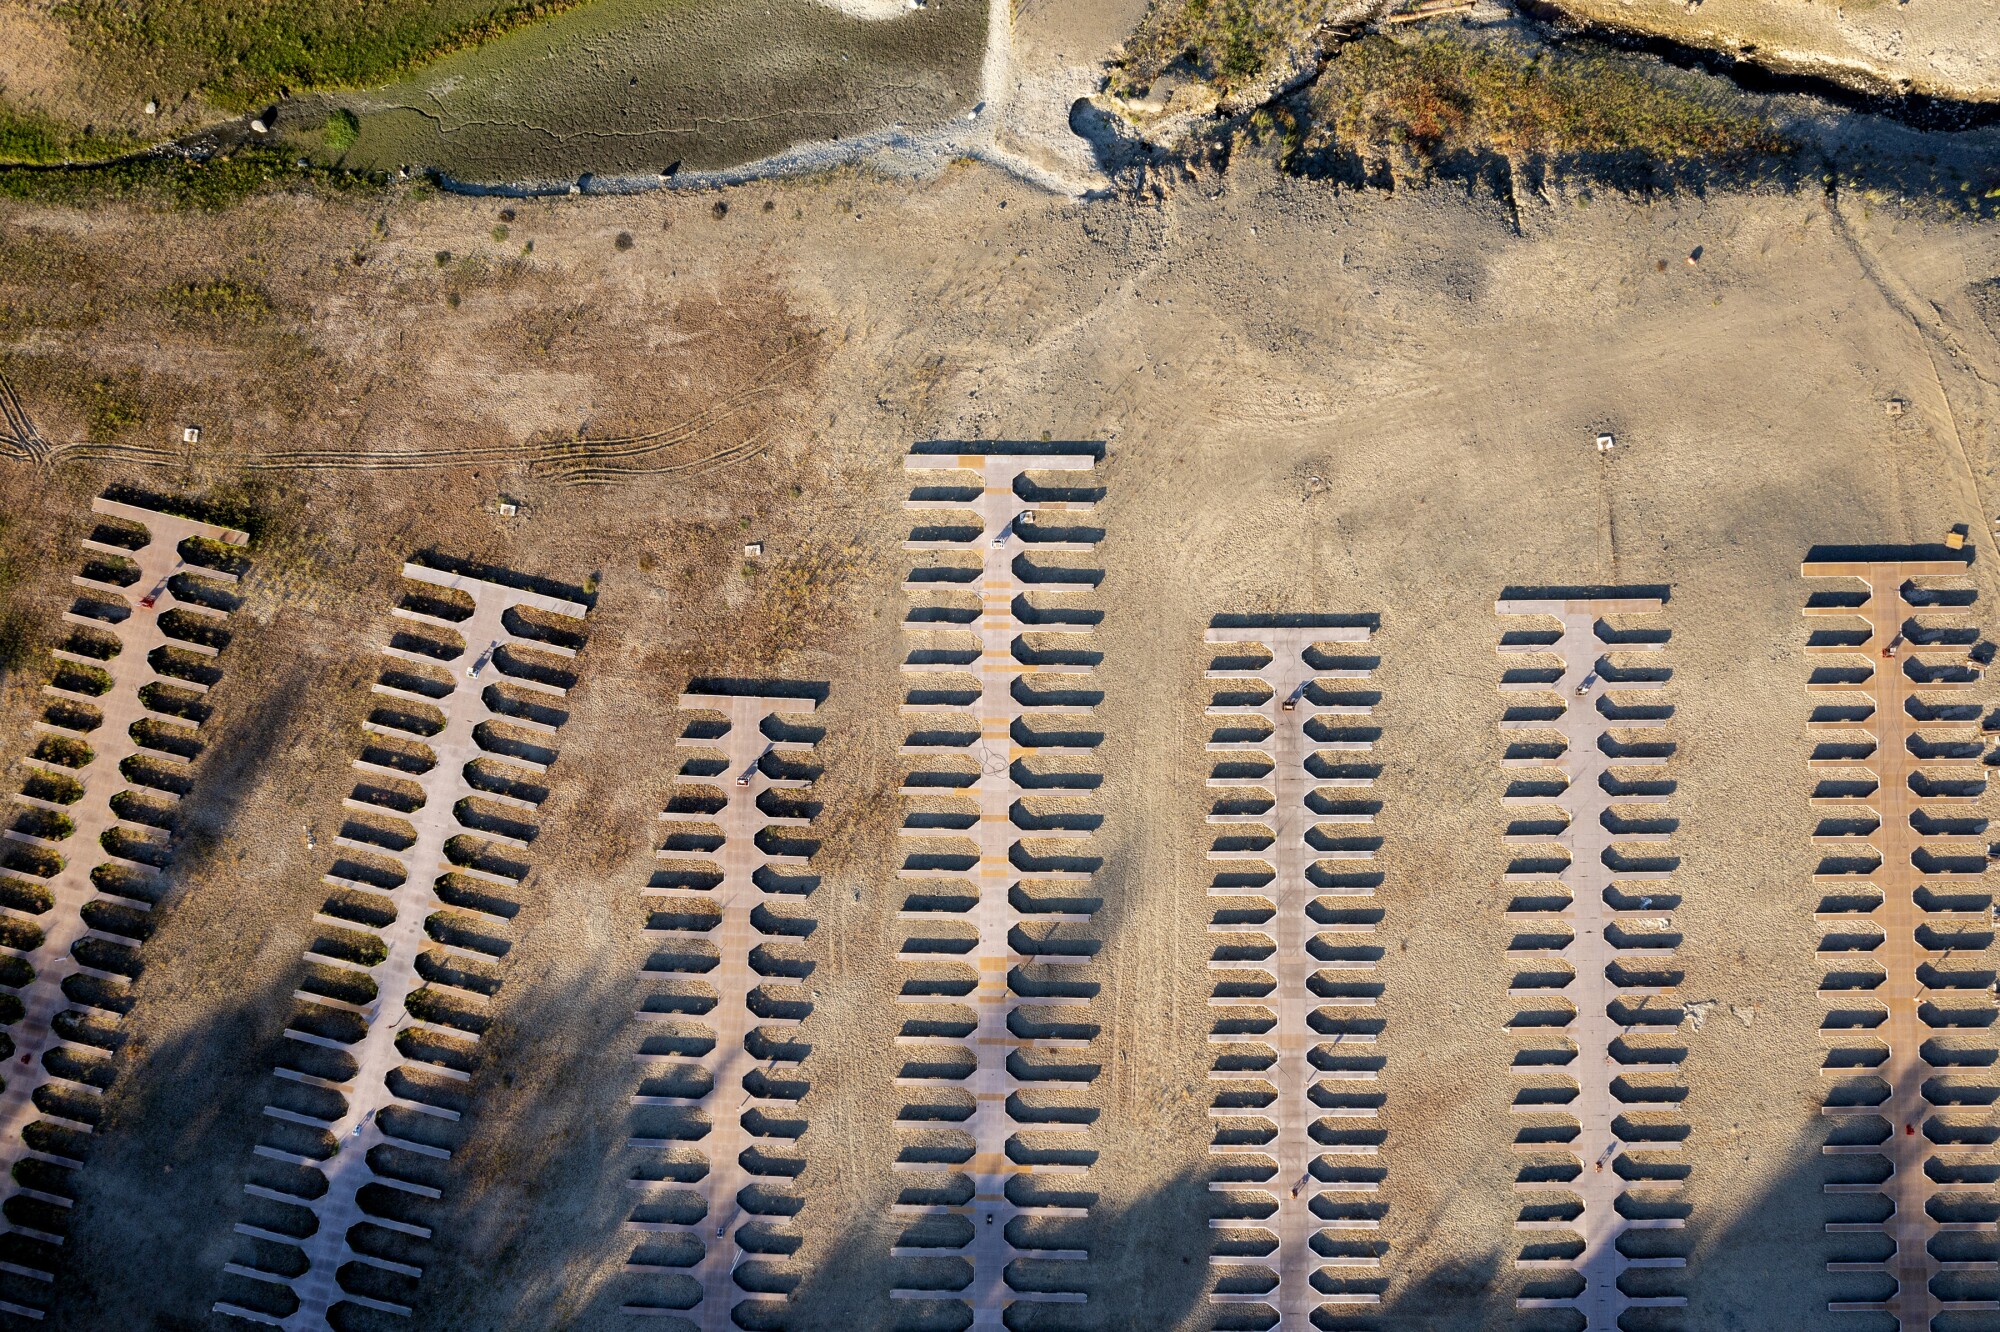 Boat slips and dry dirt are seen in an aerial view.